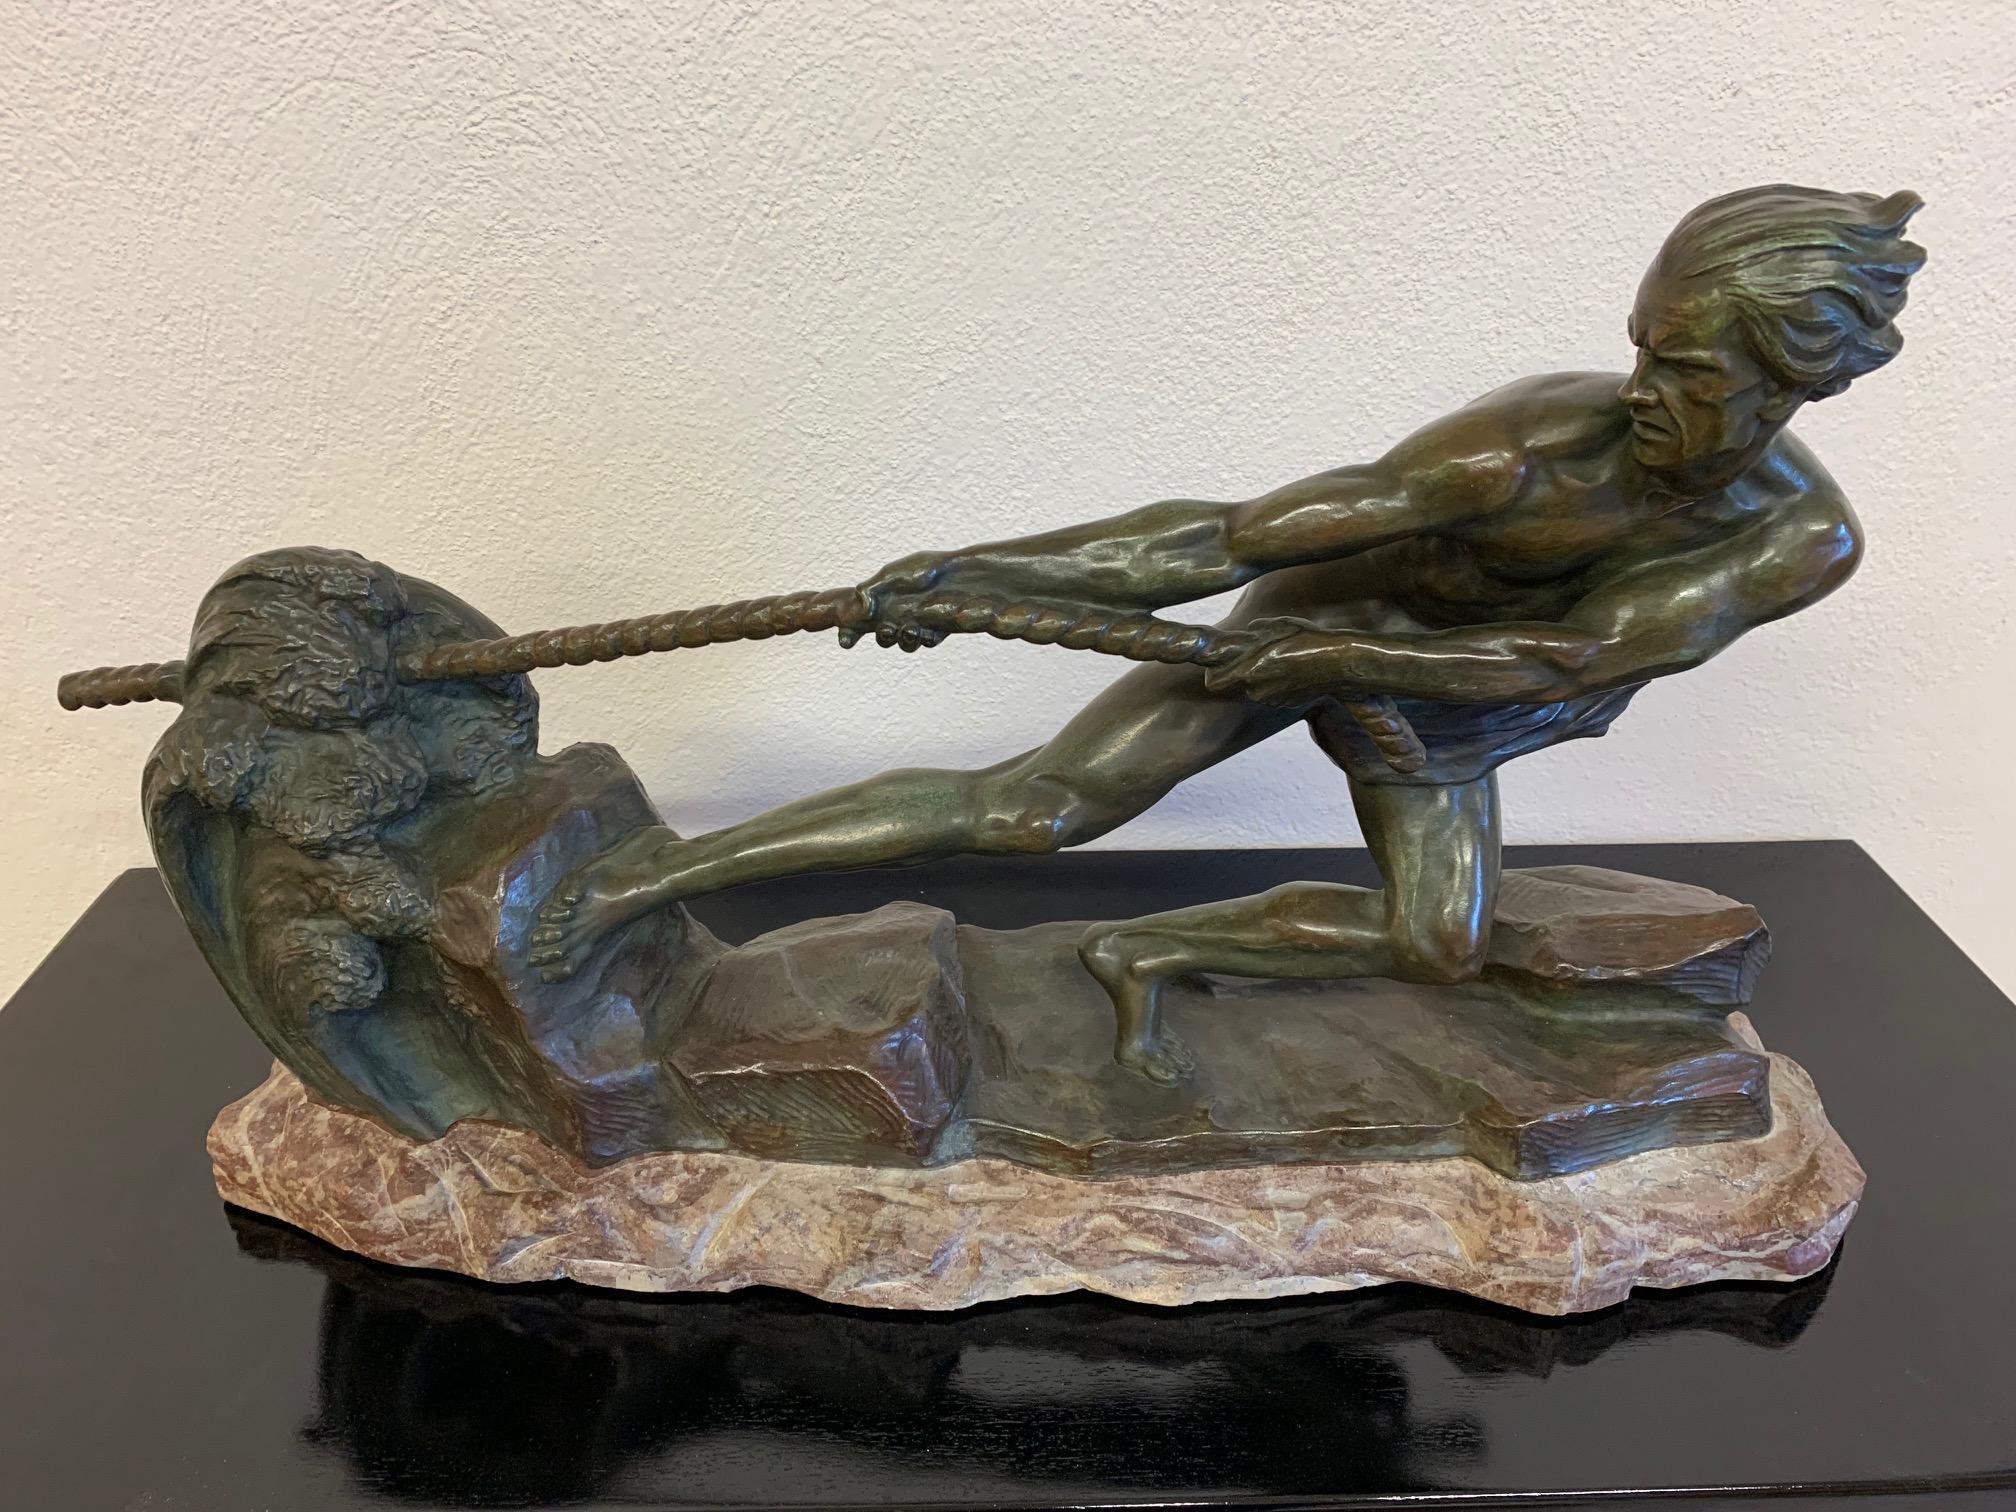 This stunning and imposing Art Deco bronze was produced in France in the 1930s. 
It is completely made of bronze and has a particular green patina added with a specific technique that makes it even more exclusive looking. It depicts an athlete